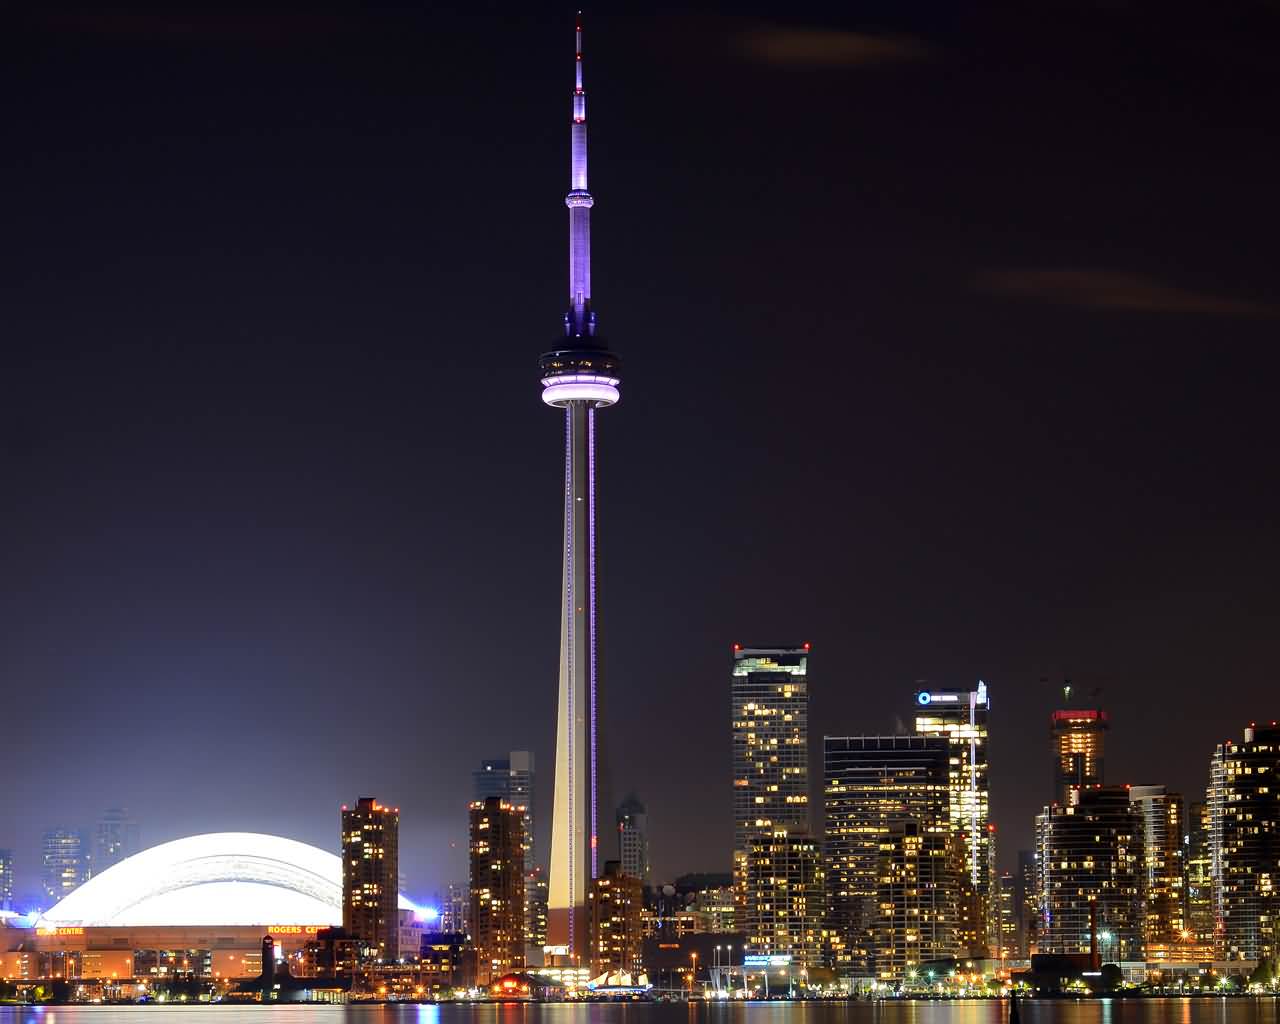 Incredible Night View Picture Of CN Tower In Canada